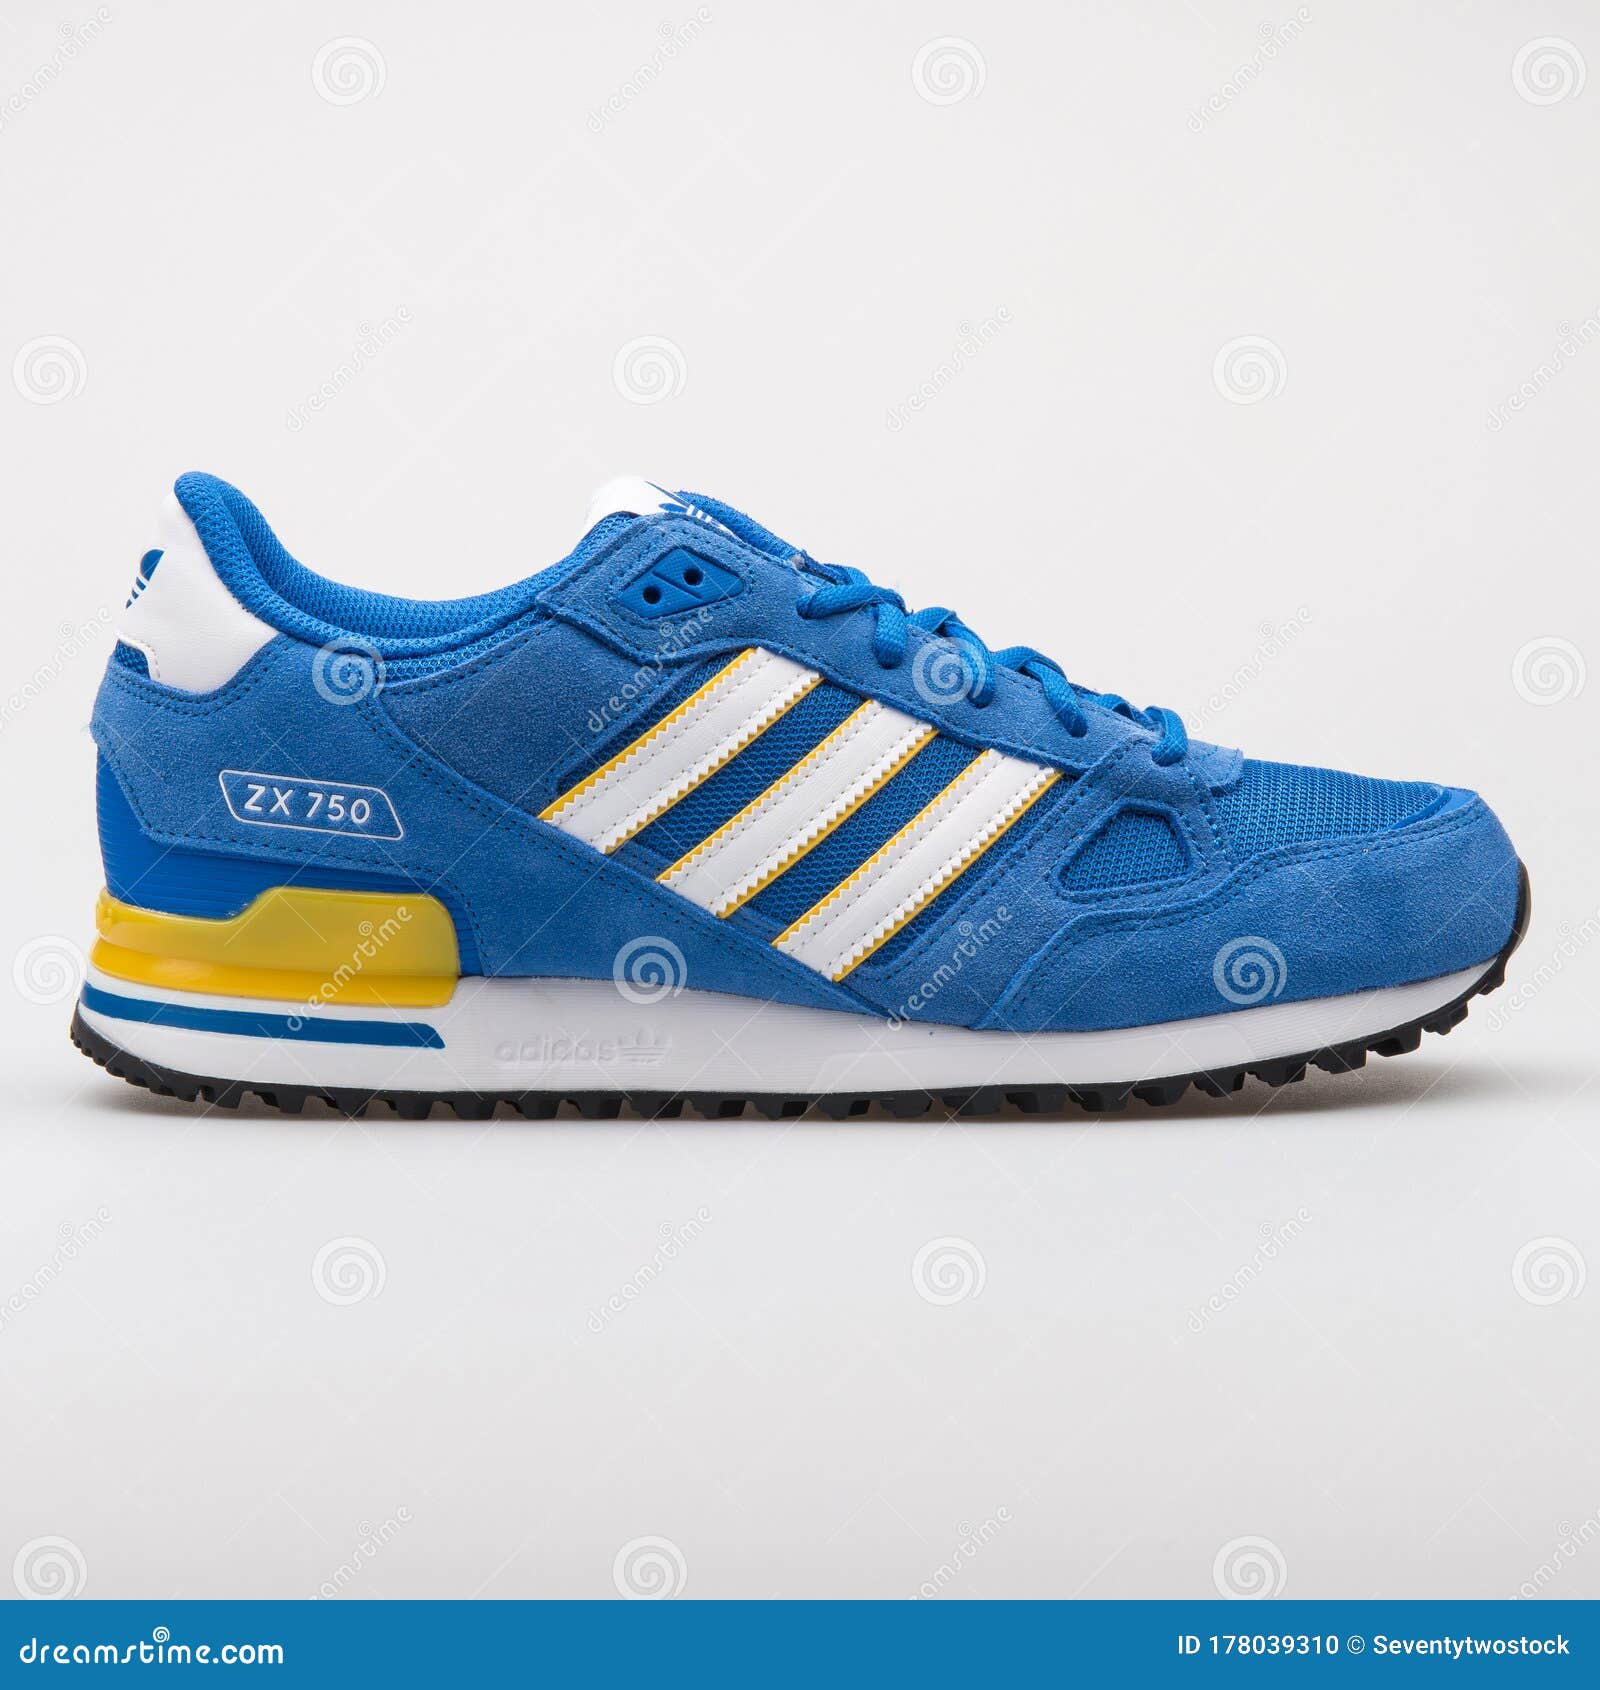 adidas zx yellow and blue